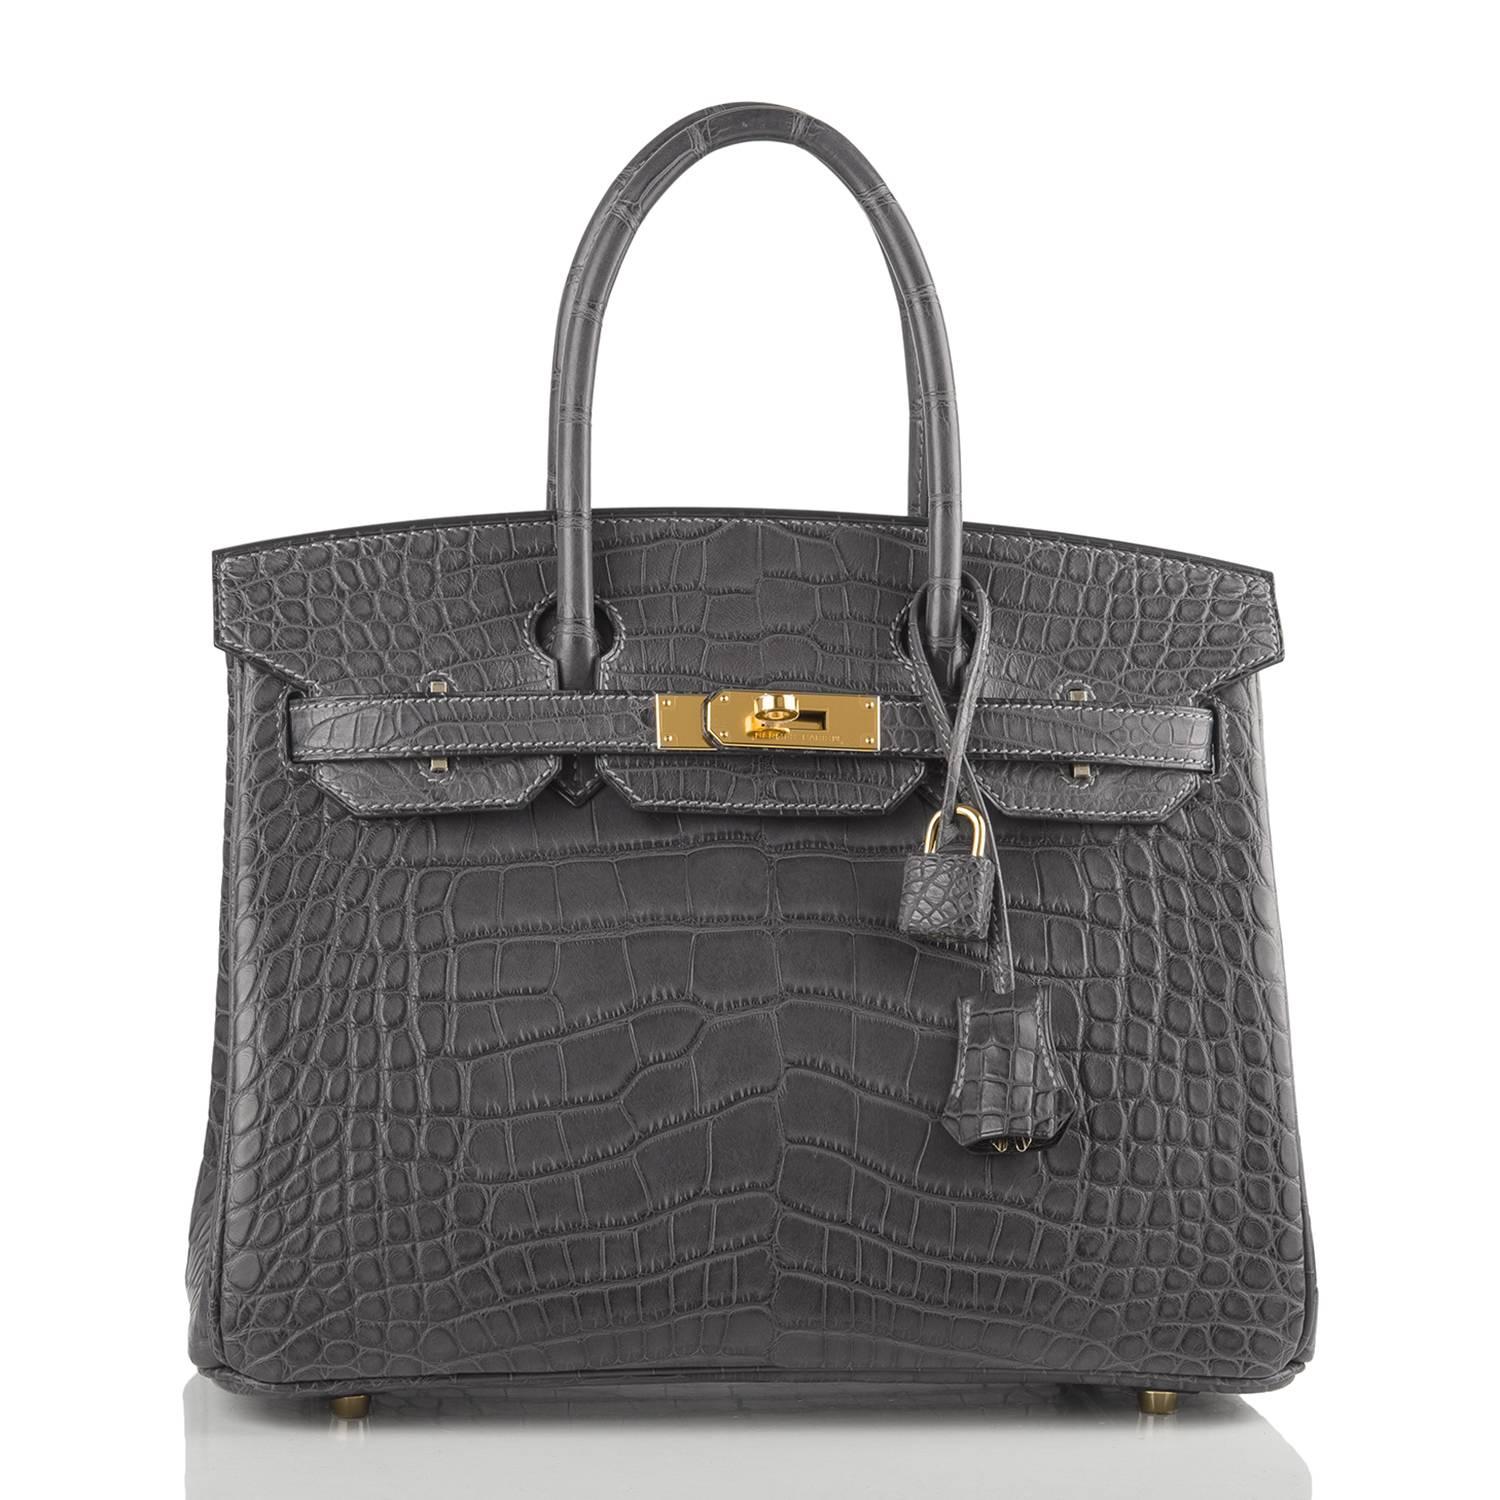 Hermes Graphite Birkin 30cm of matte alligator leather with gold hardware.

This rare Birkin has medium grey stitching, a front toggle closure, a clochette with lock and two keys, and double rolled handles.

The interior is lined with Graphite